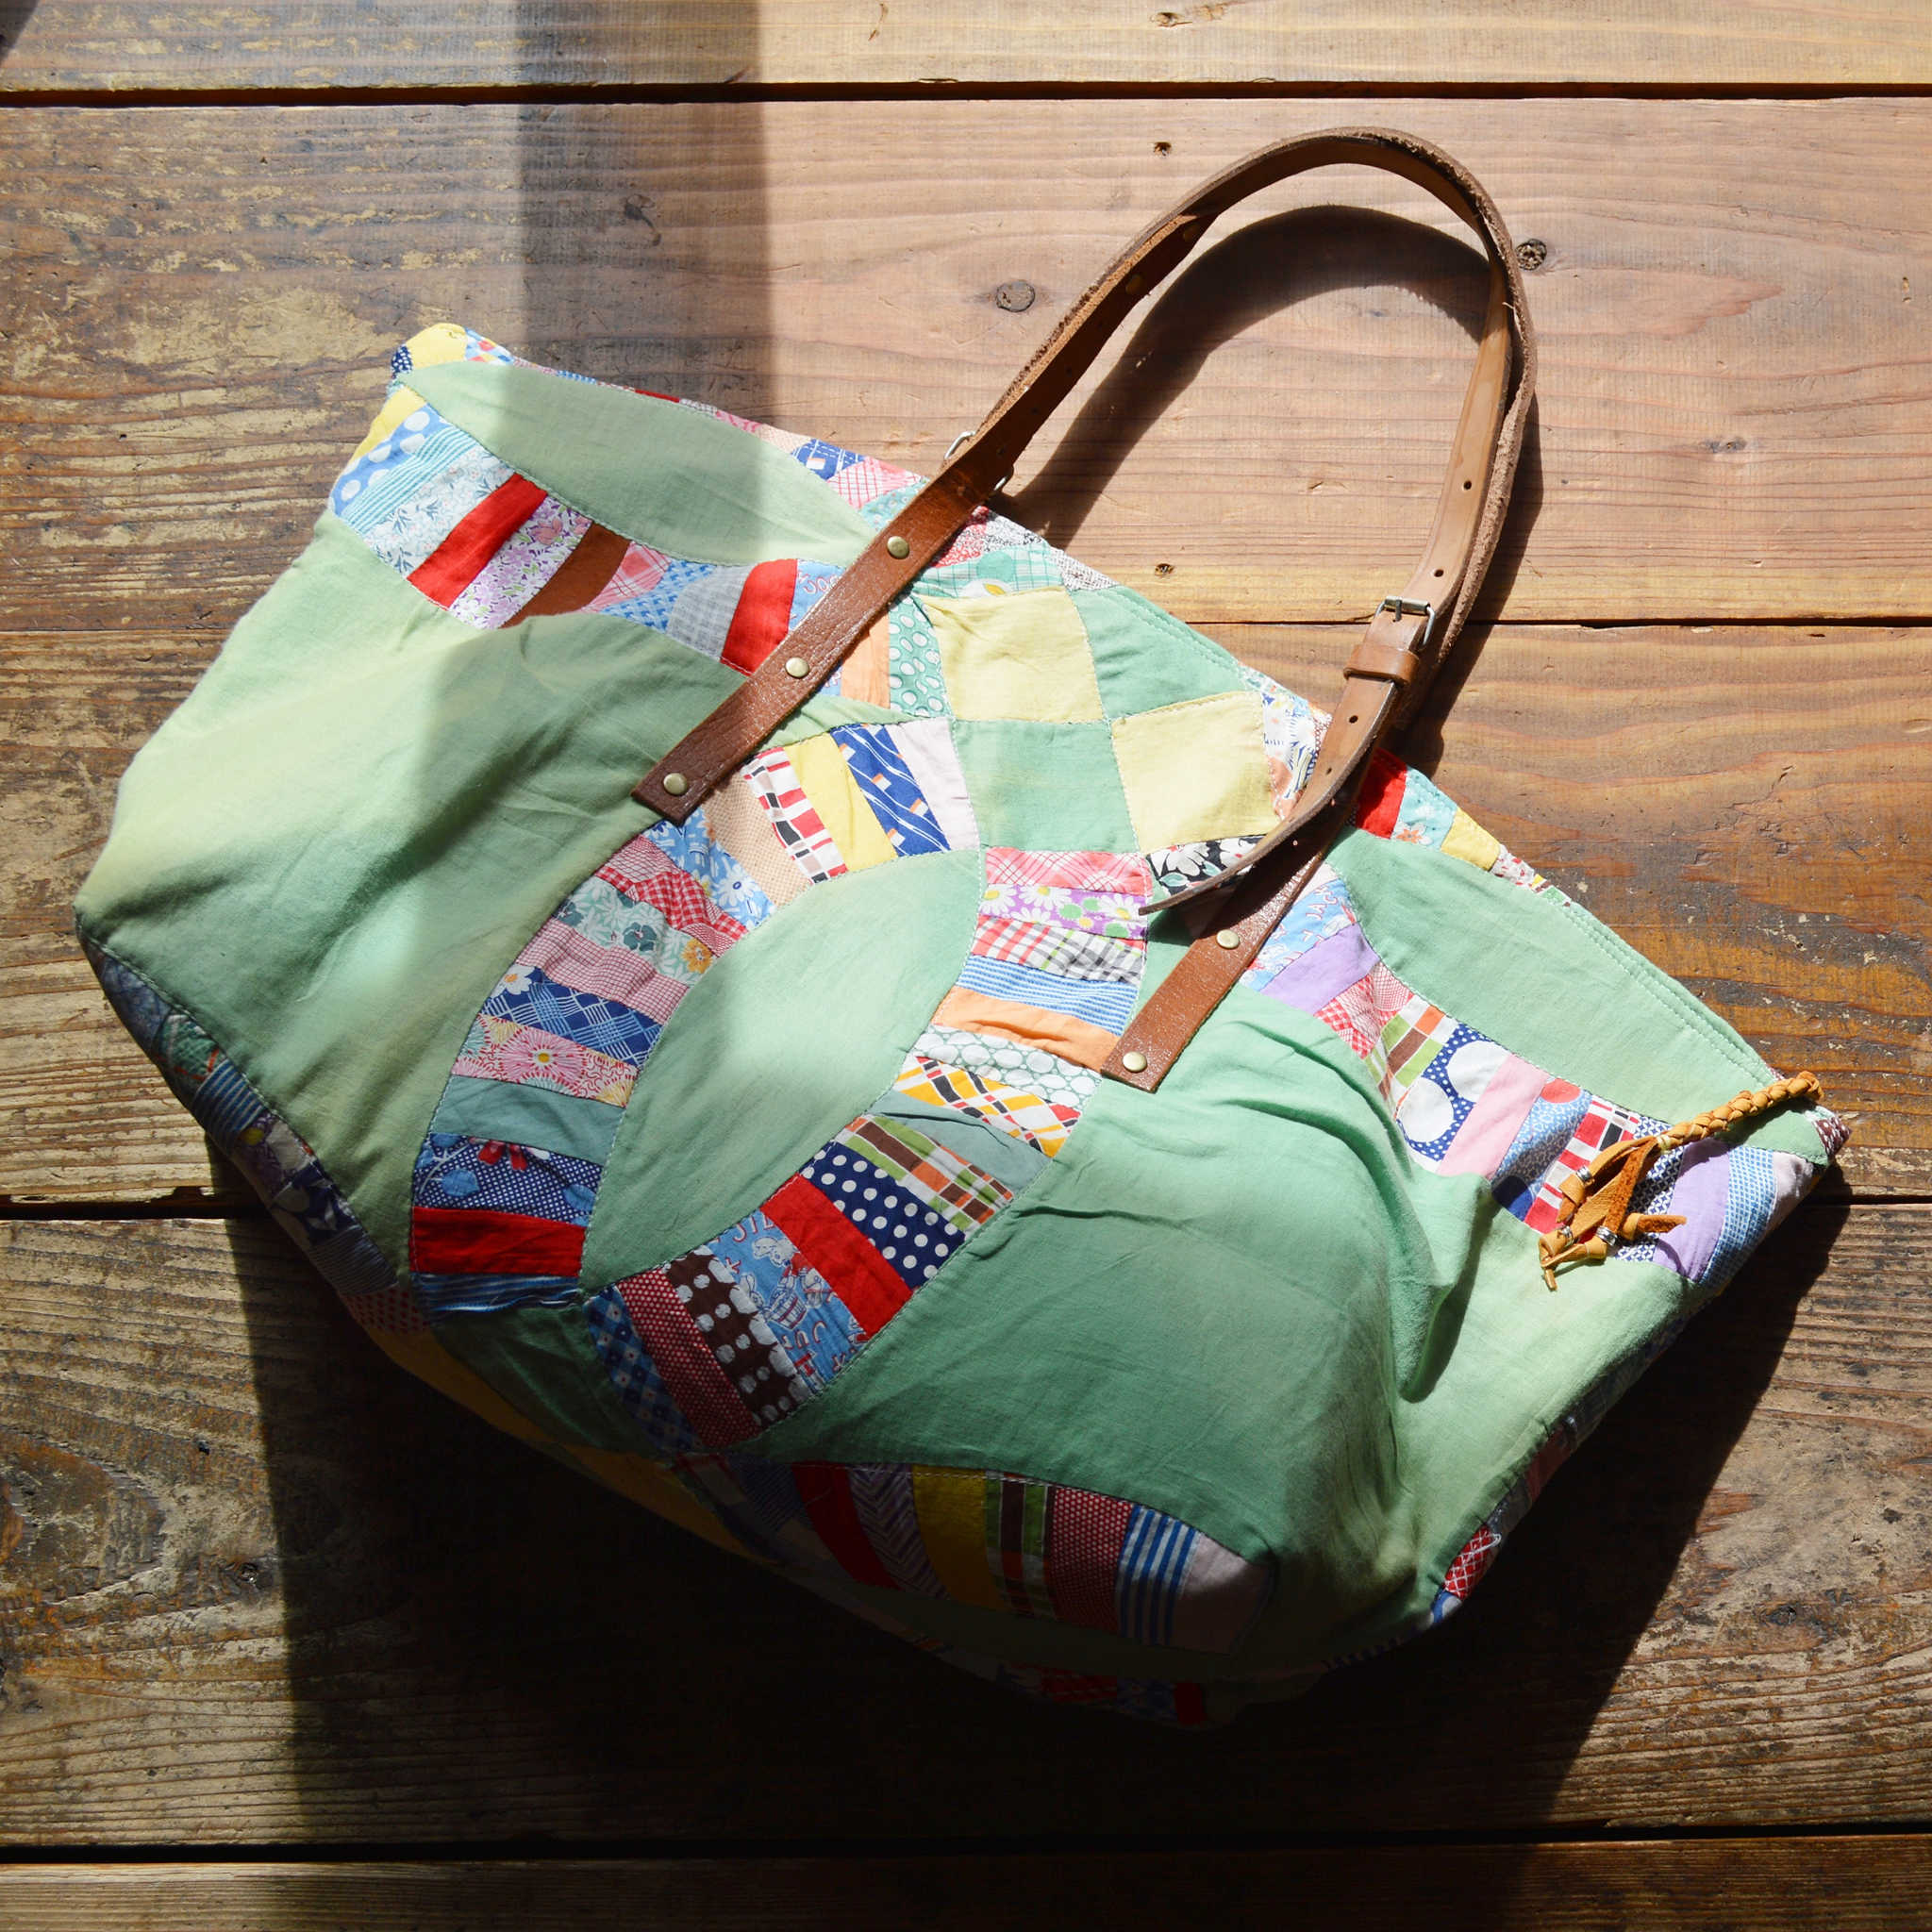 Nasngwam.×EARLY MORNING ナスングワム アーリーモーニング / QUILT LARGE FASTENER TOTE キルトラージファスナートート